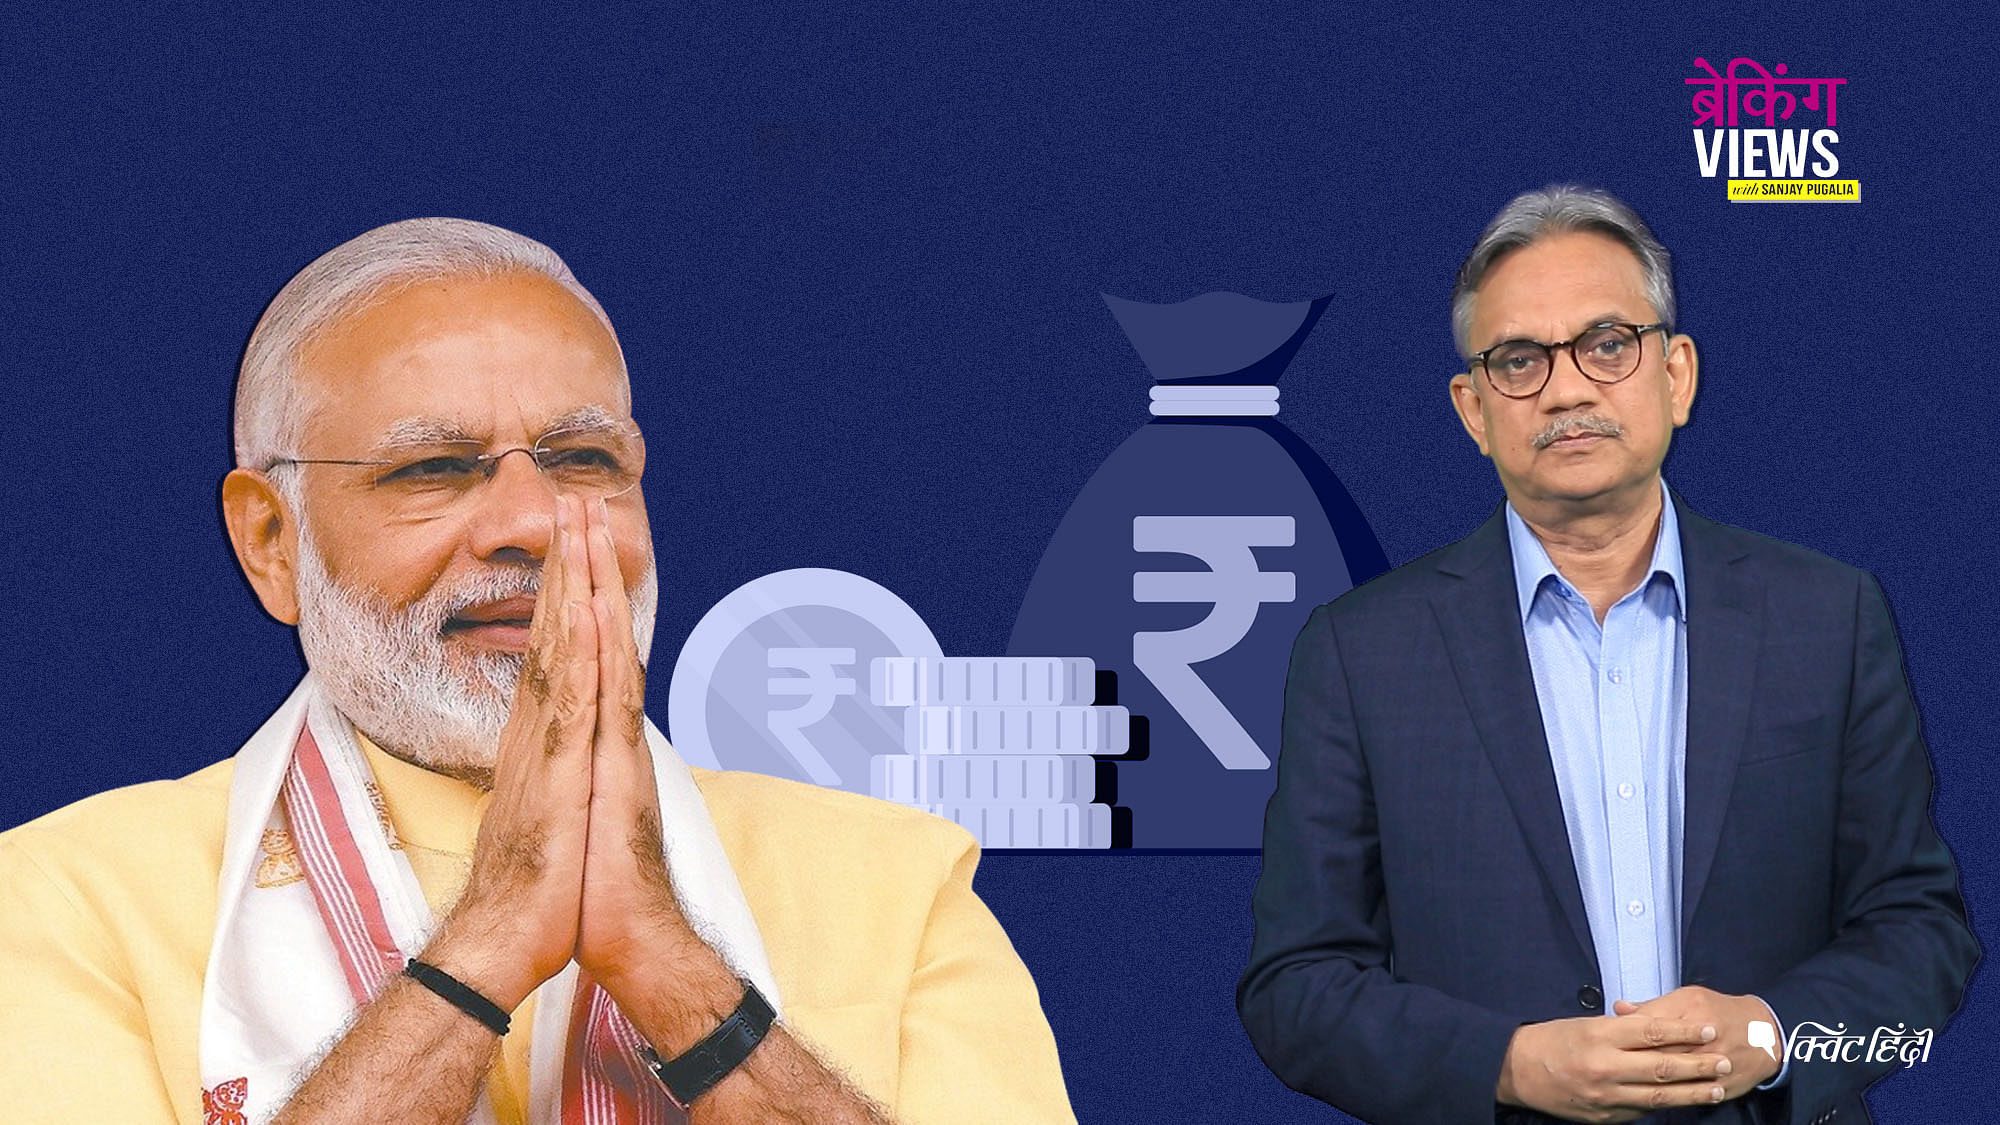 The 2019 Budget reflects the Modi government’s desperation.